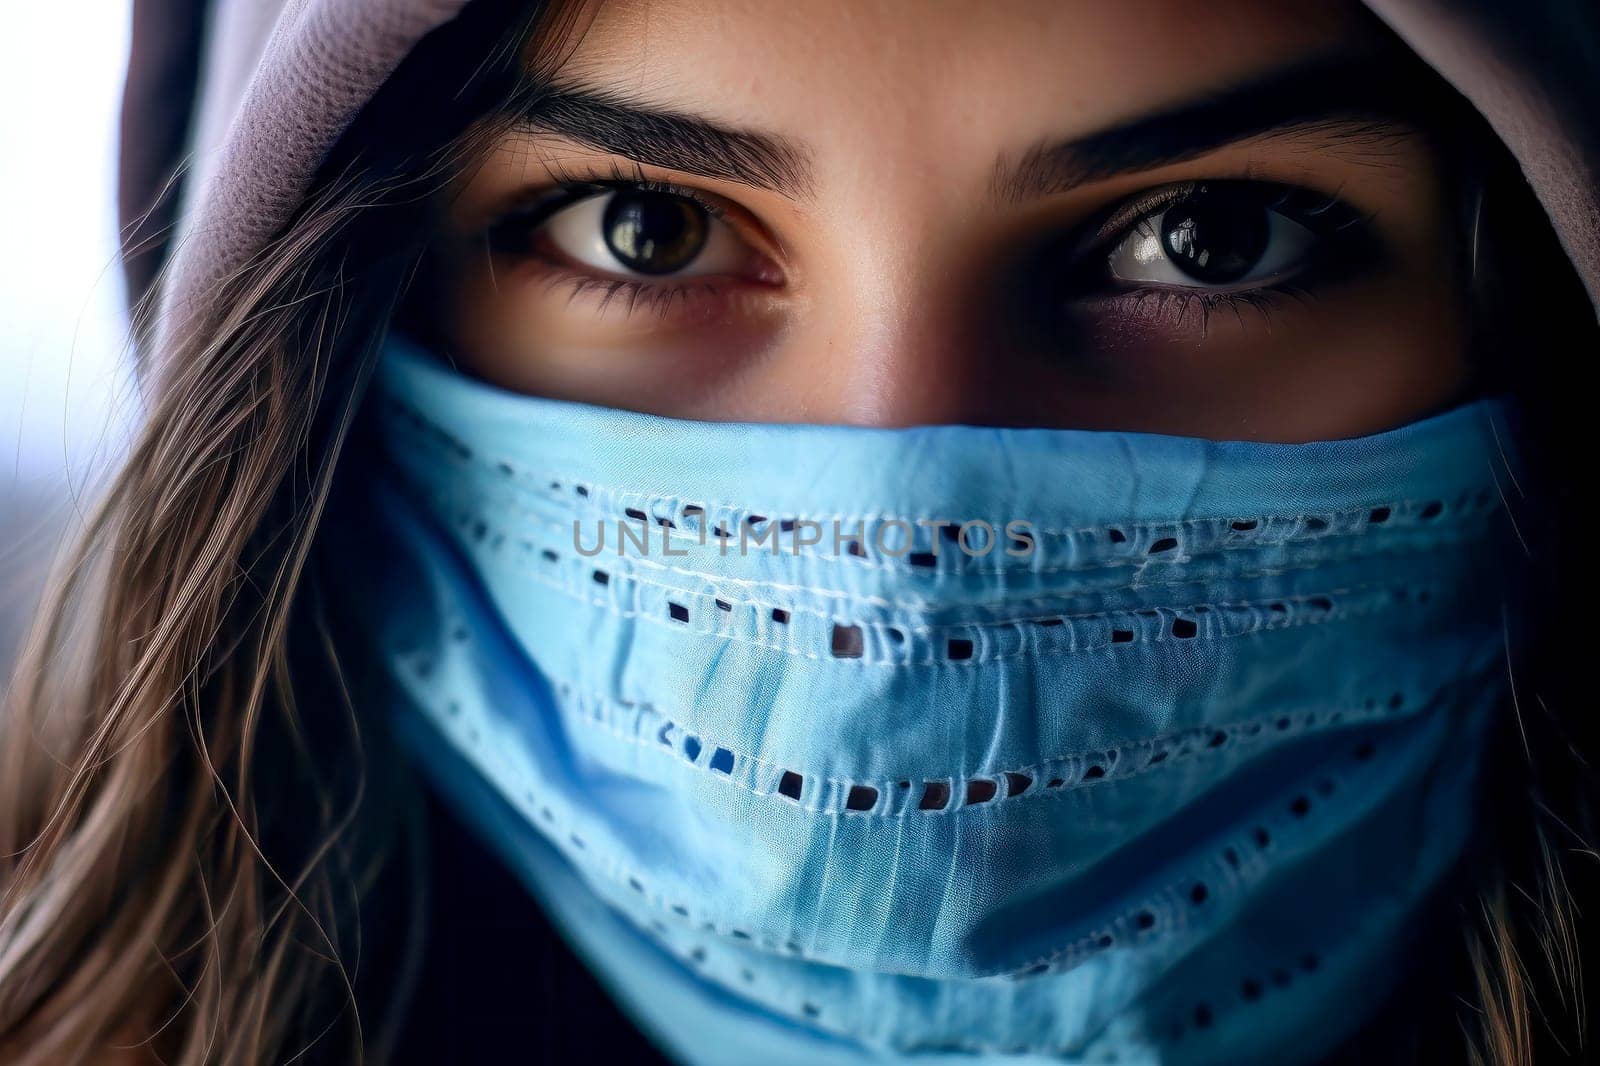 Urban style girl wearing hoodie and medical mask during pandemic, portraying resilience.